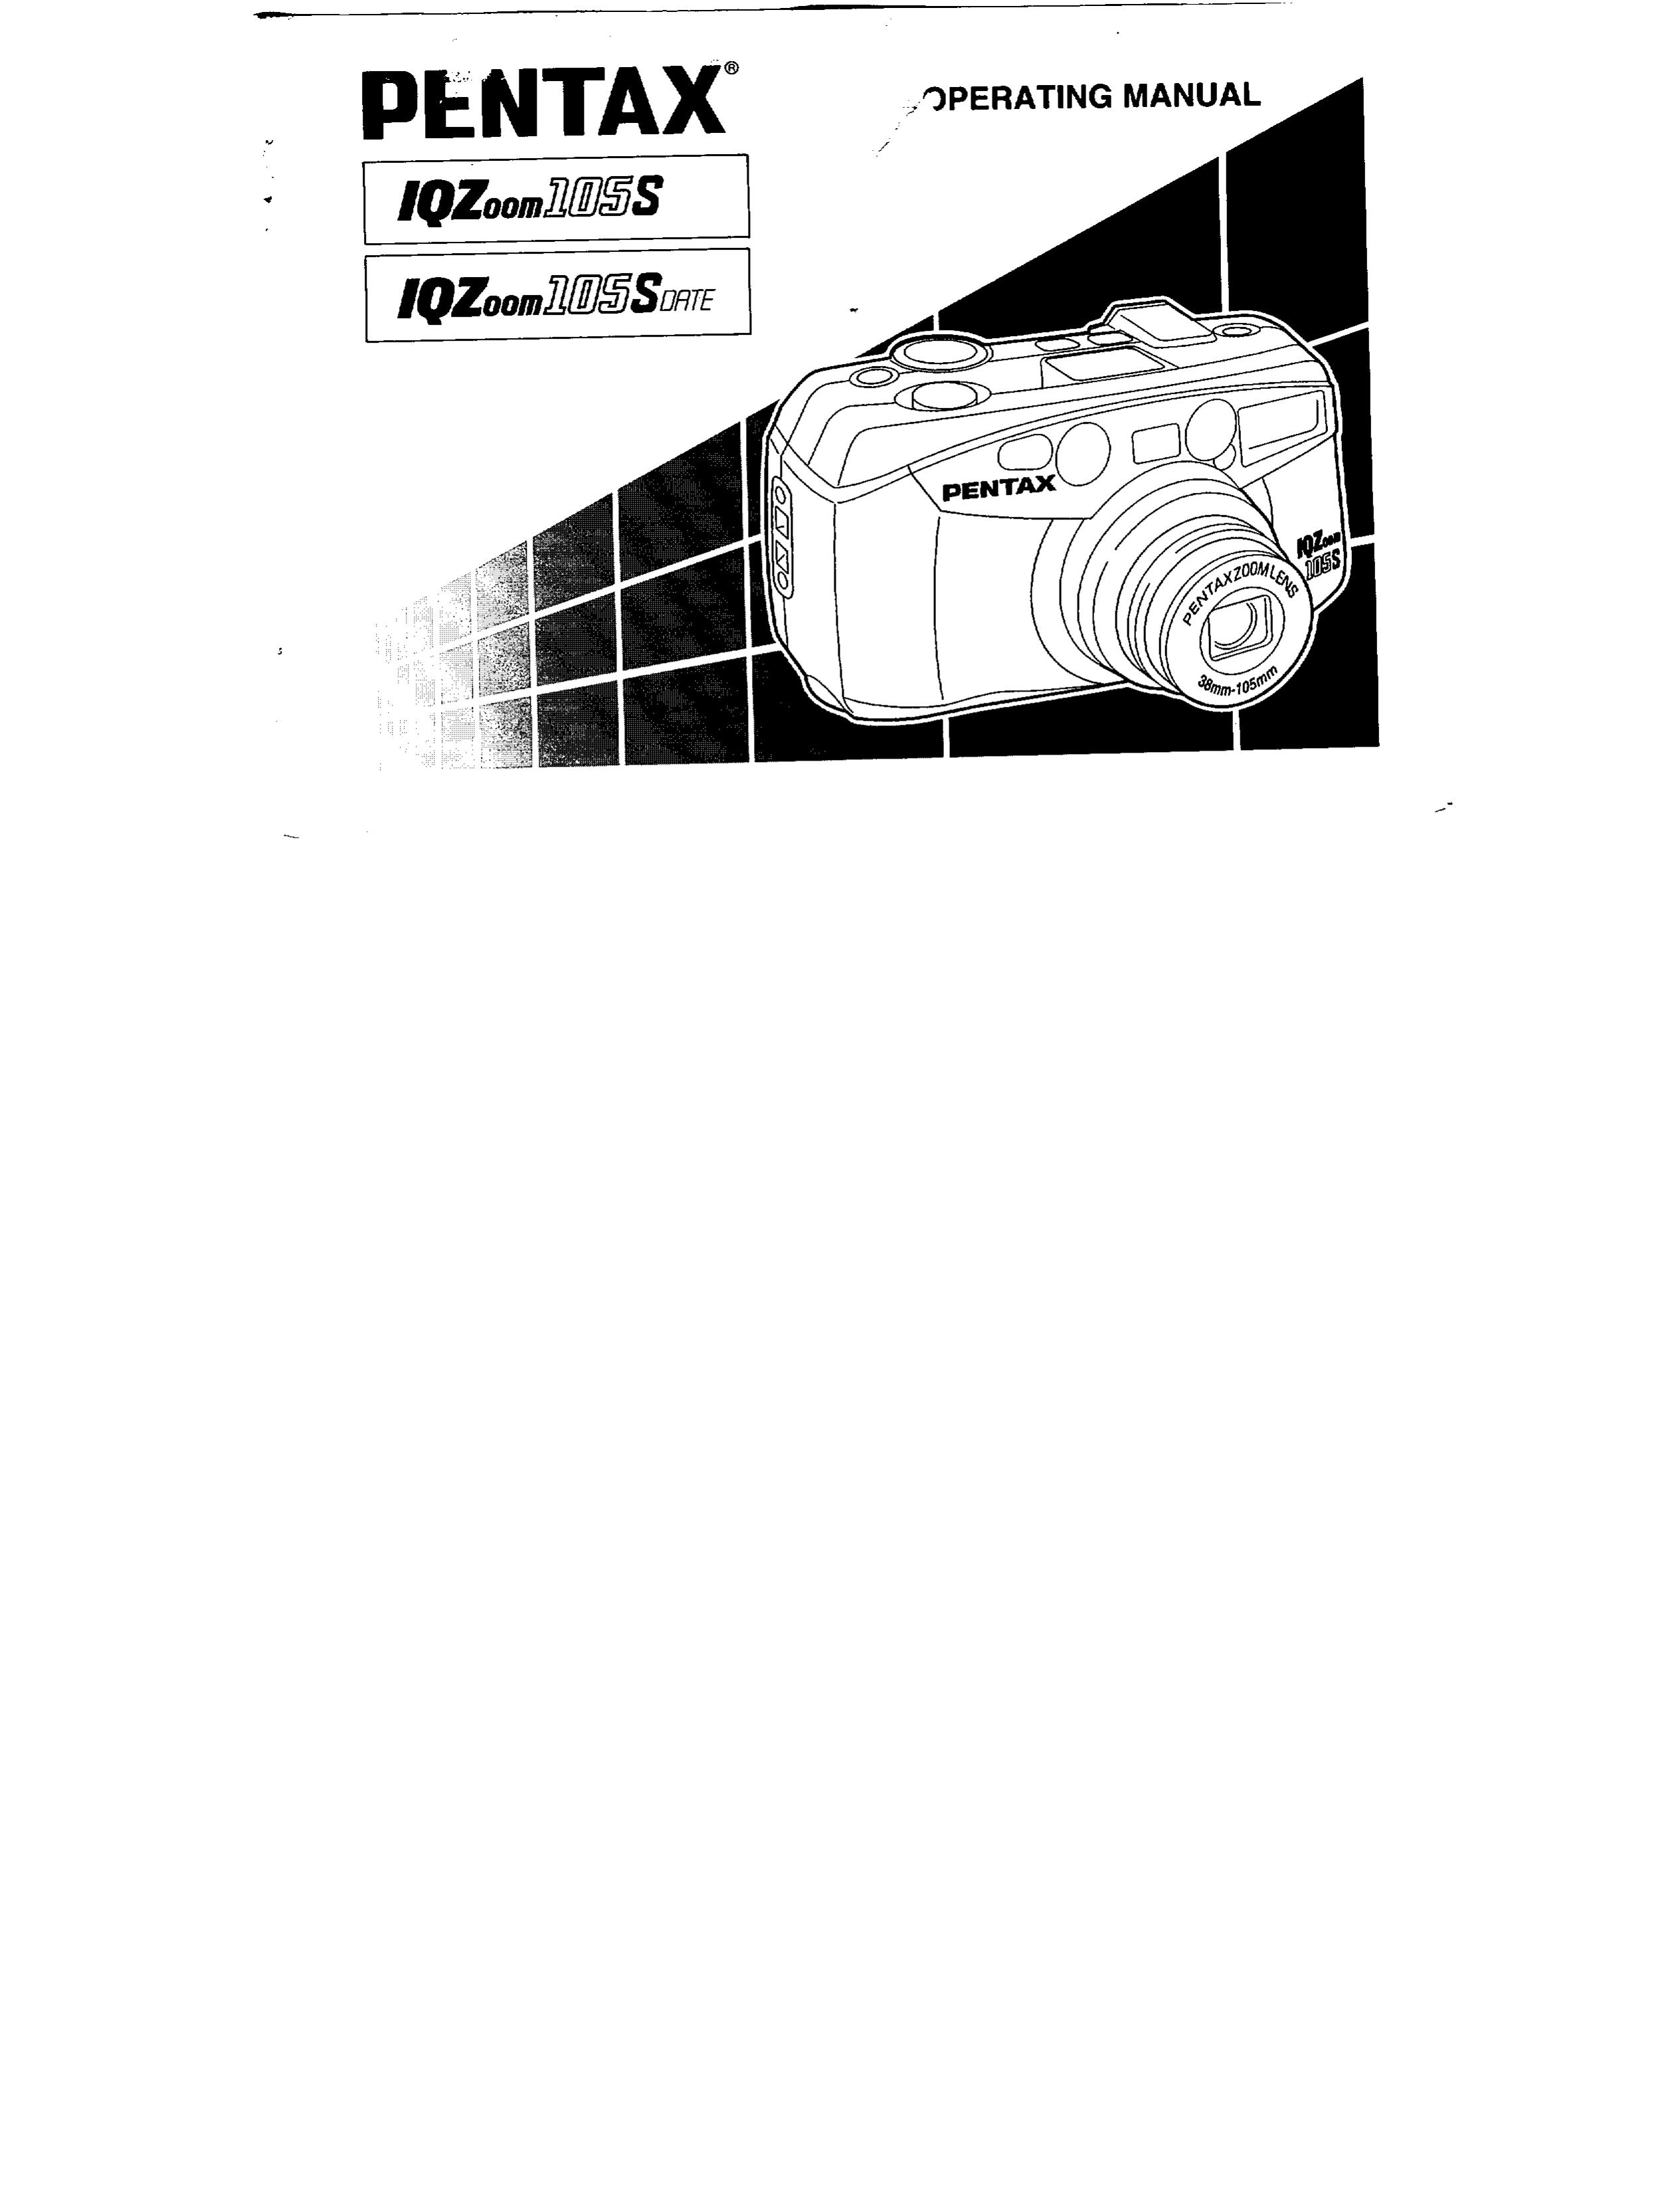 Pentax IQZoom 105S Camcorder User Manual